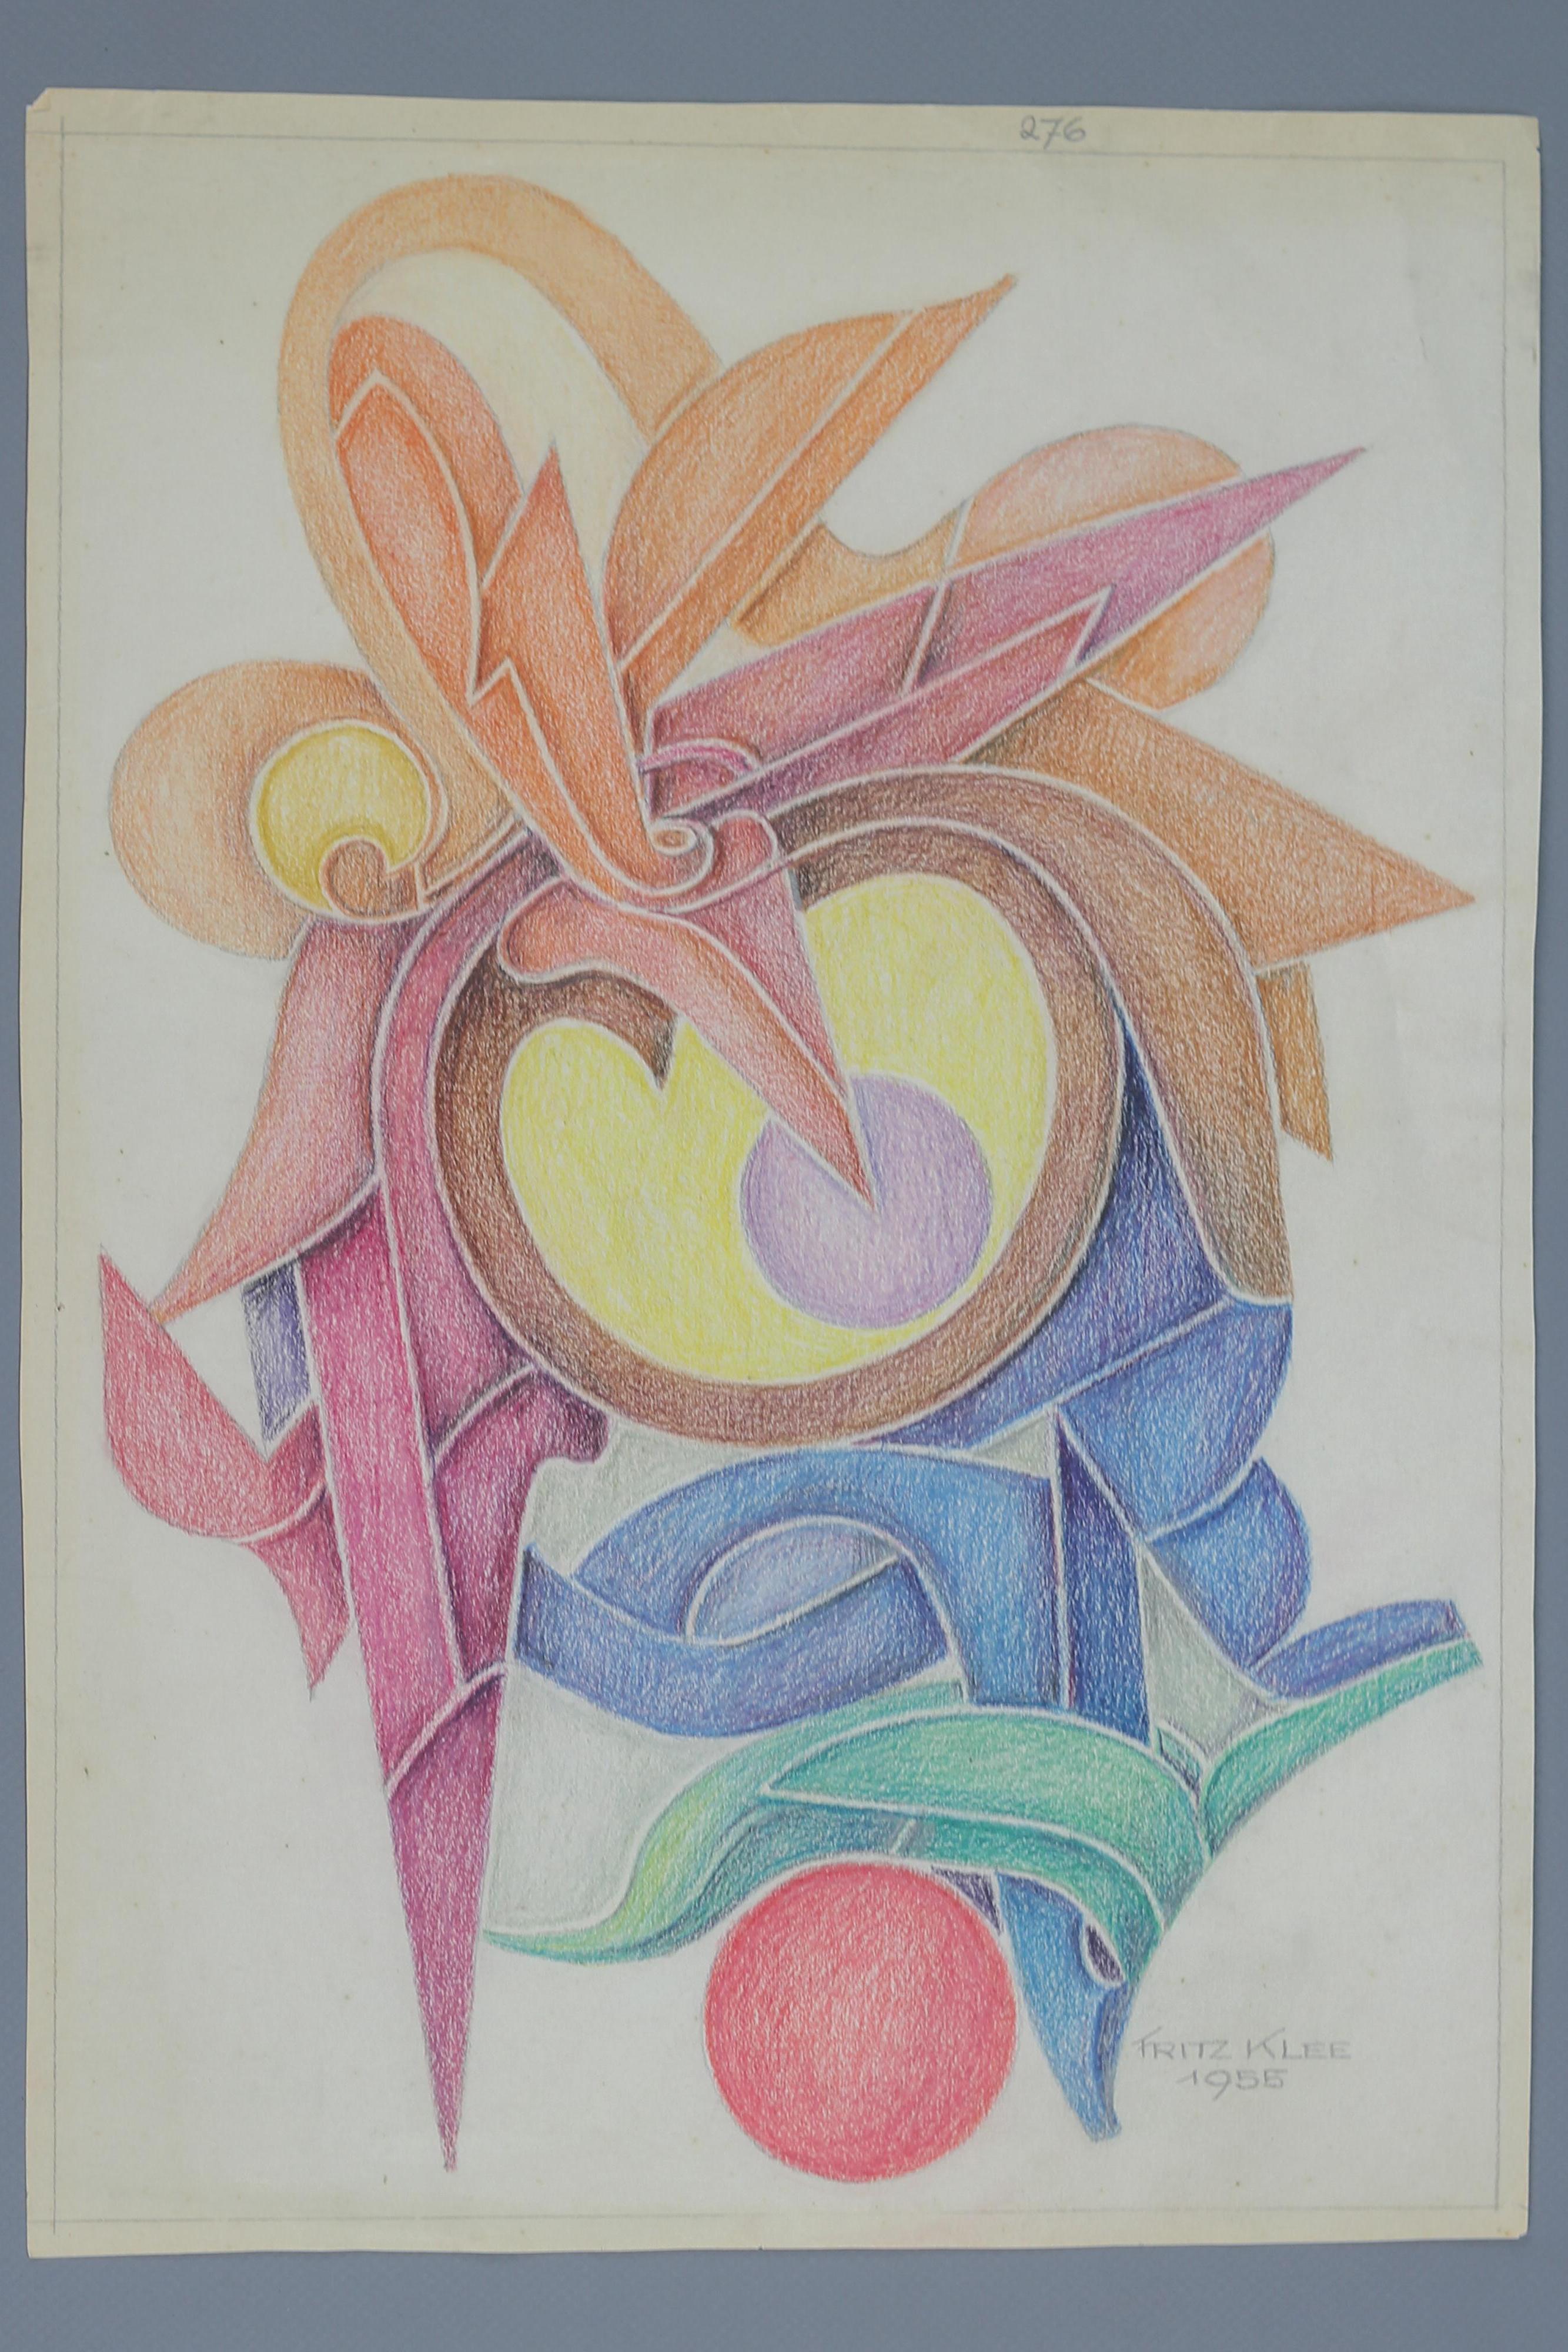 A magnificent abstract organic hand-drawing, a draft of an ornamental composition in strong, bright colors by Fritz Klee. Colored pencils on paper, signed and dated 'Fritz Klee 1955', numbered on top.
Sheet size: 38 cm x 27 cm / 14.96 in x 10.63